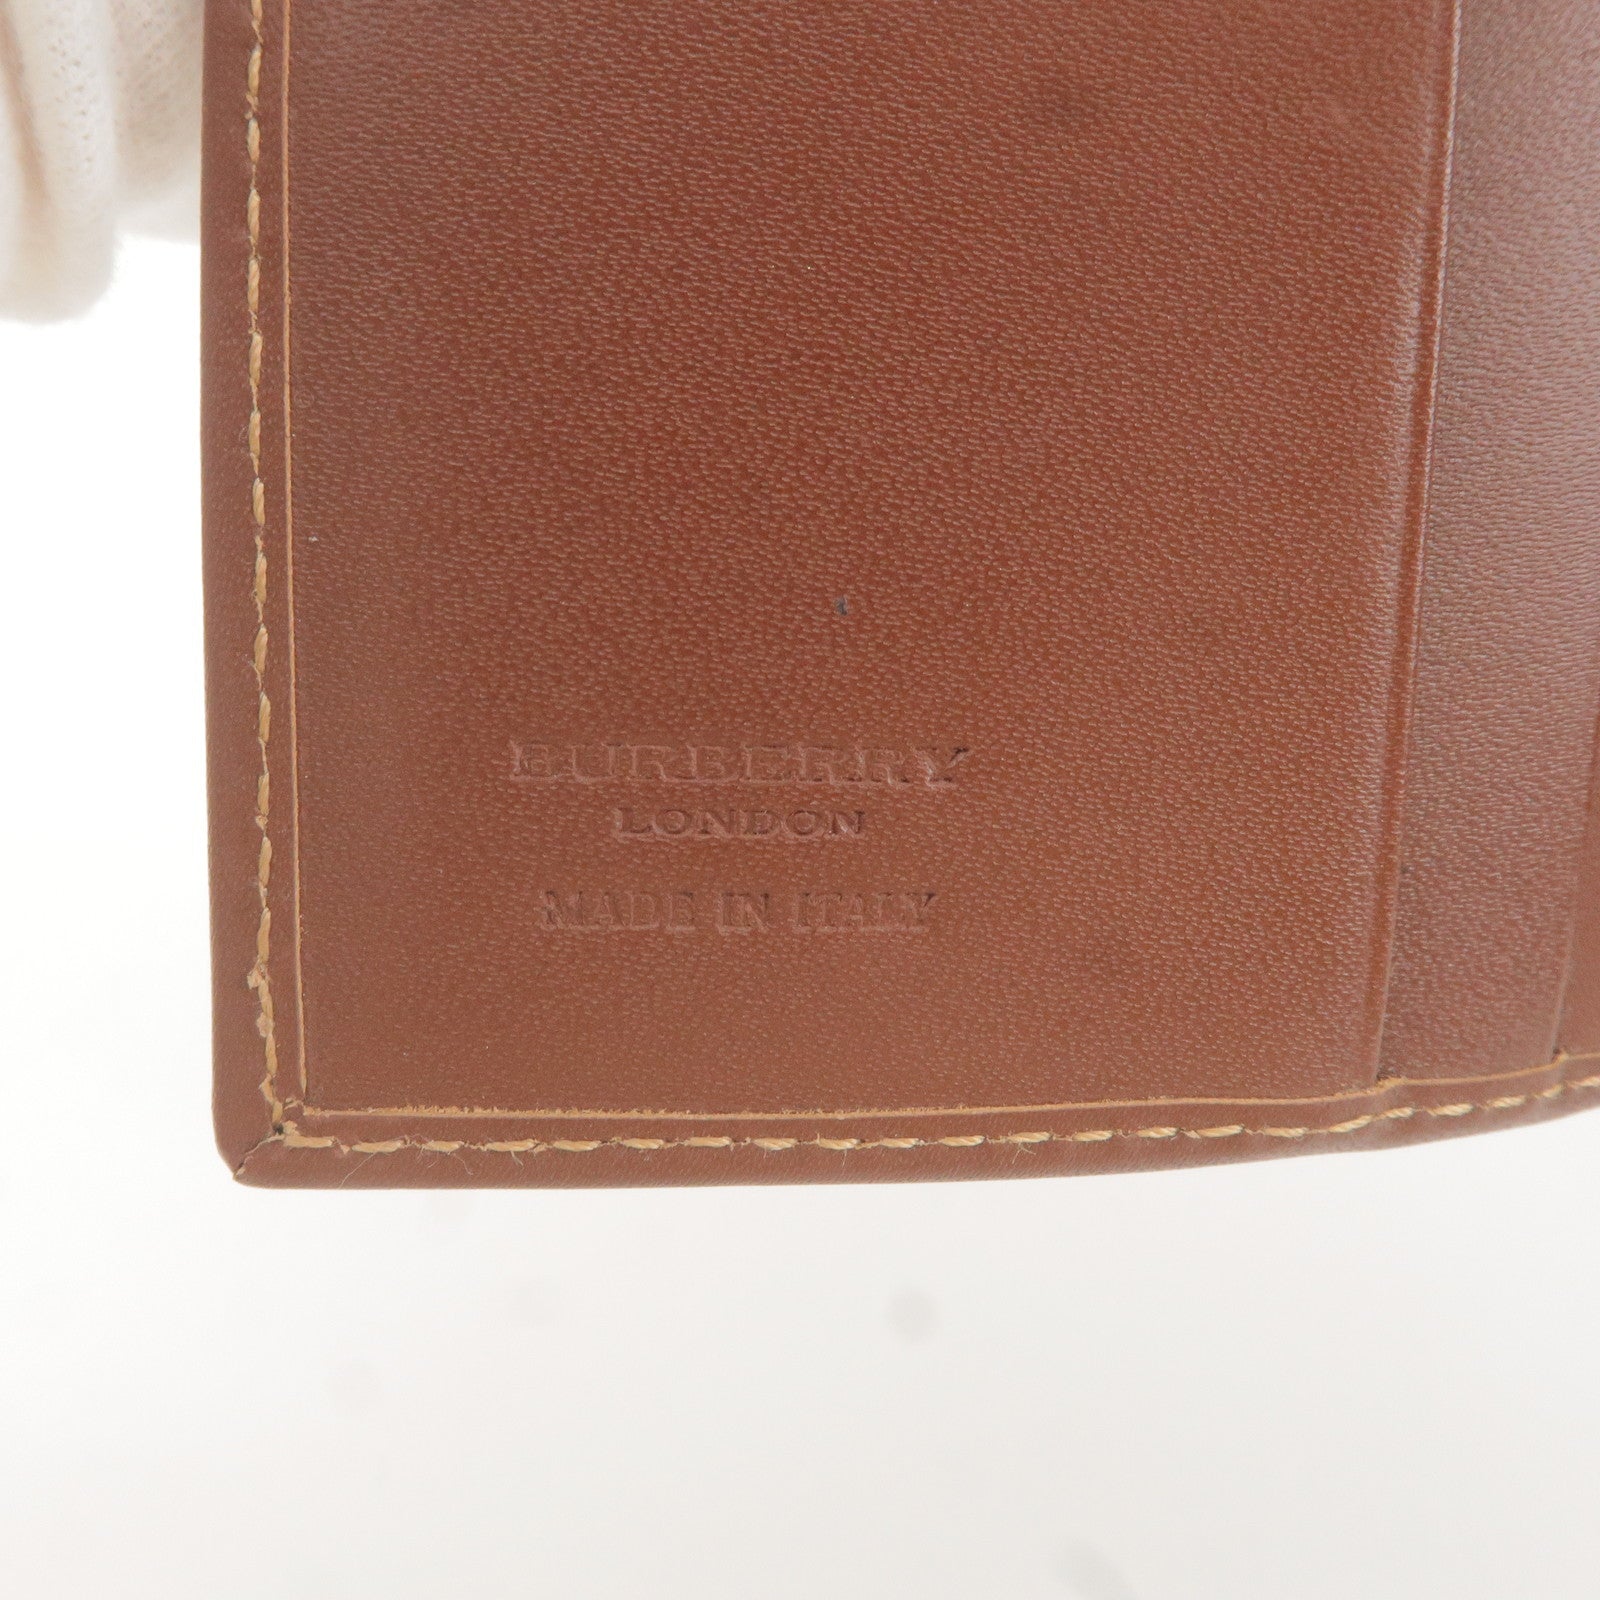 Burberry Fold Over Leather Wallet